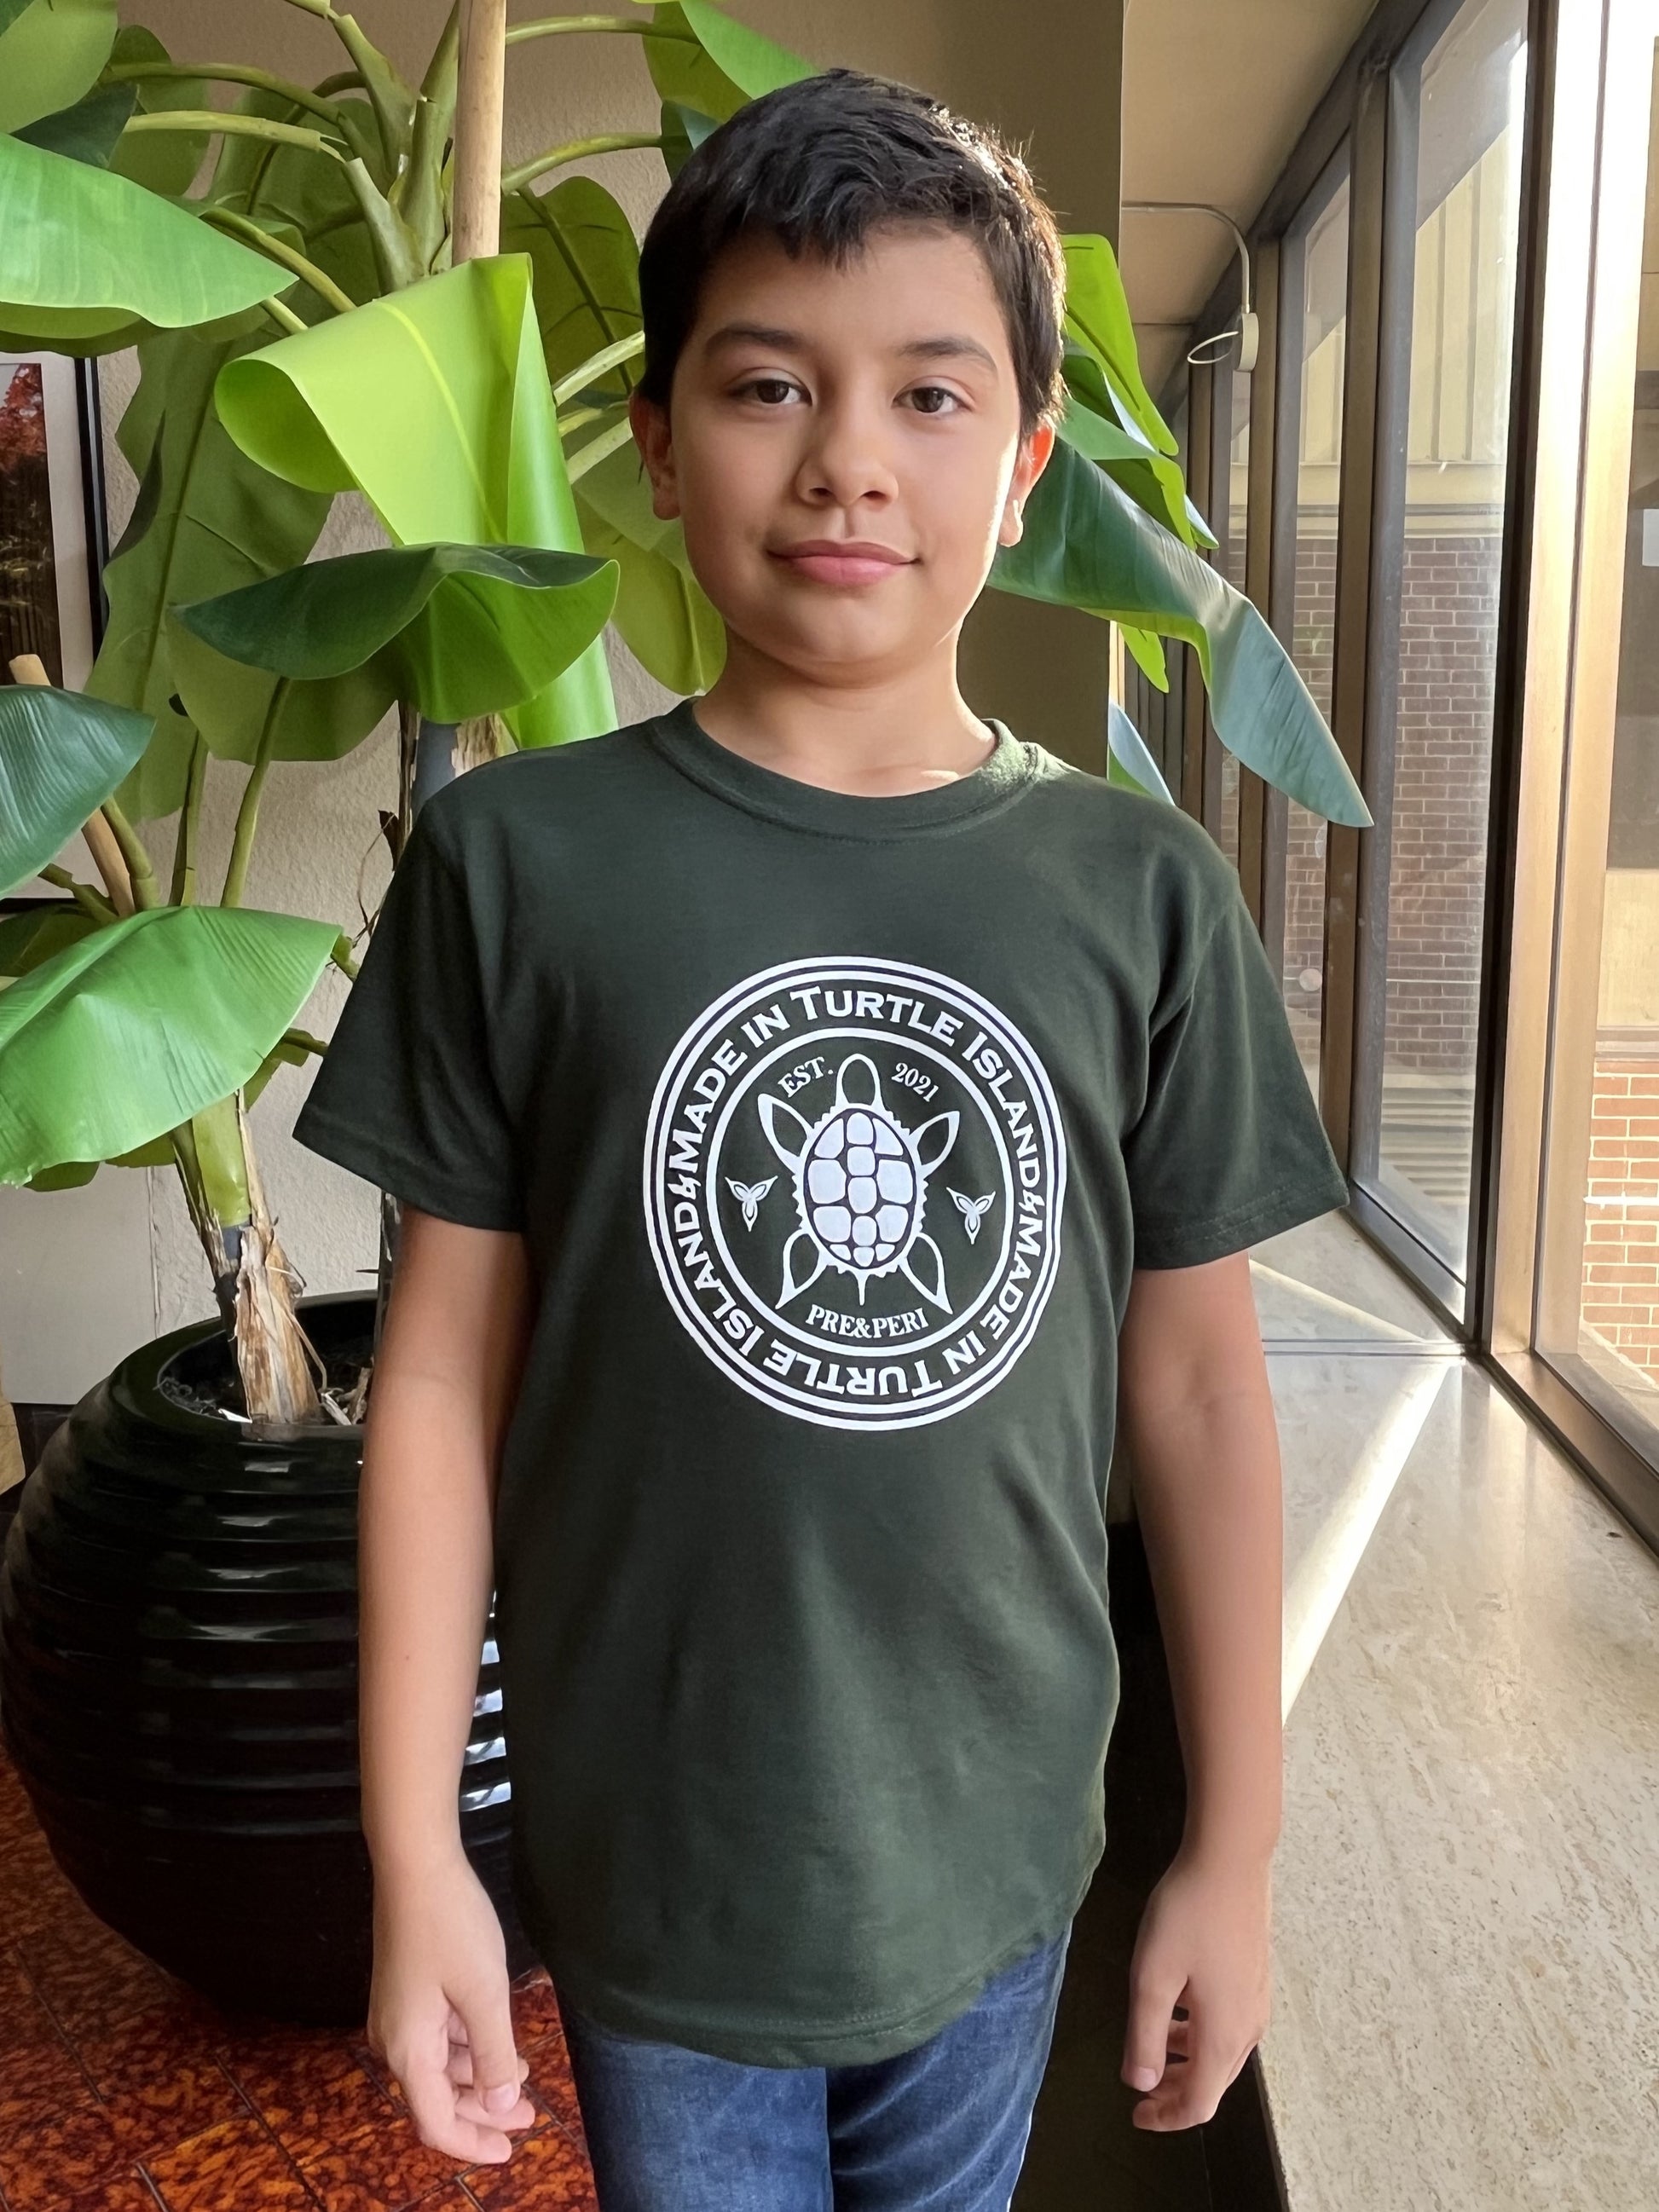 A boy wearing a forest green t-shirt with a white print of a turtle in a circle with the words "Made in Turtle Island" around it.